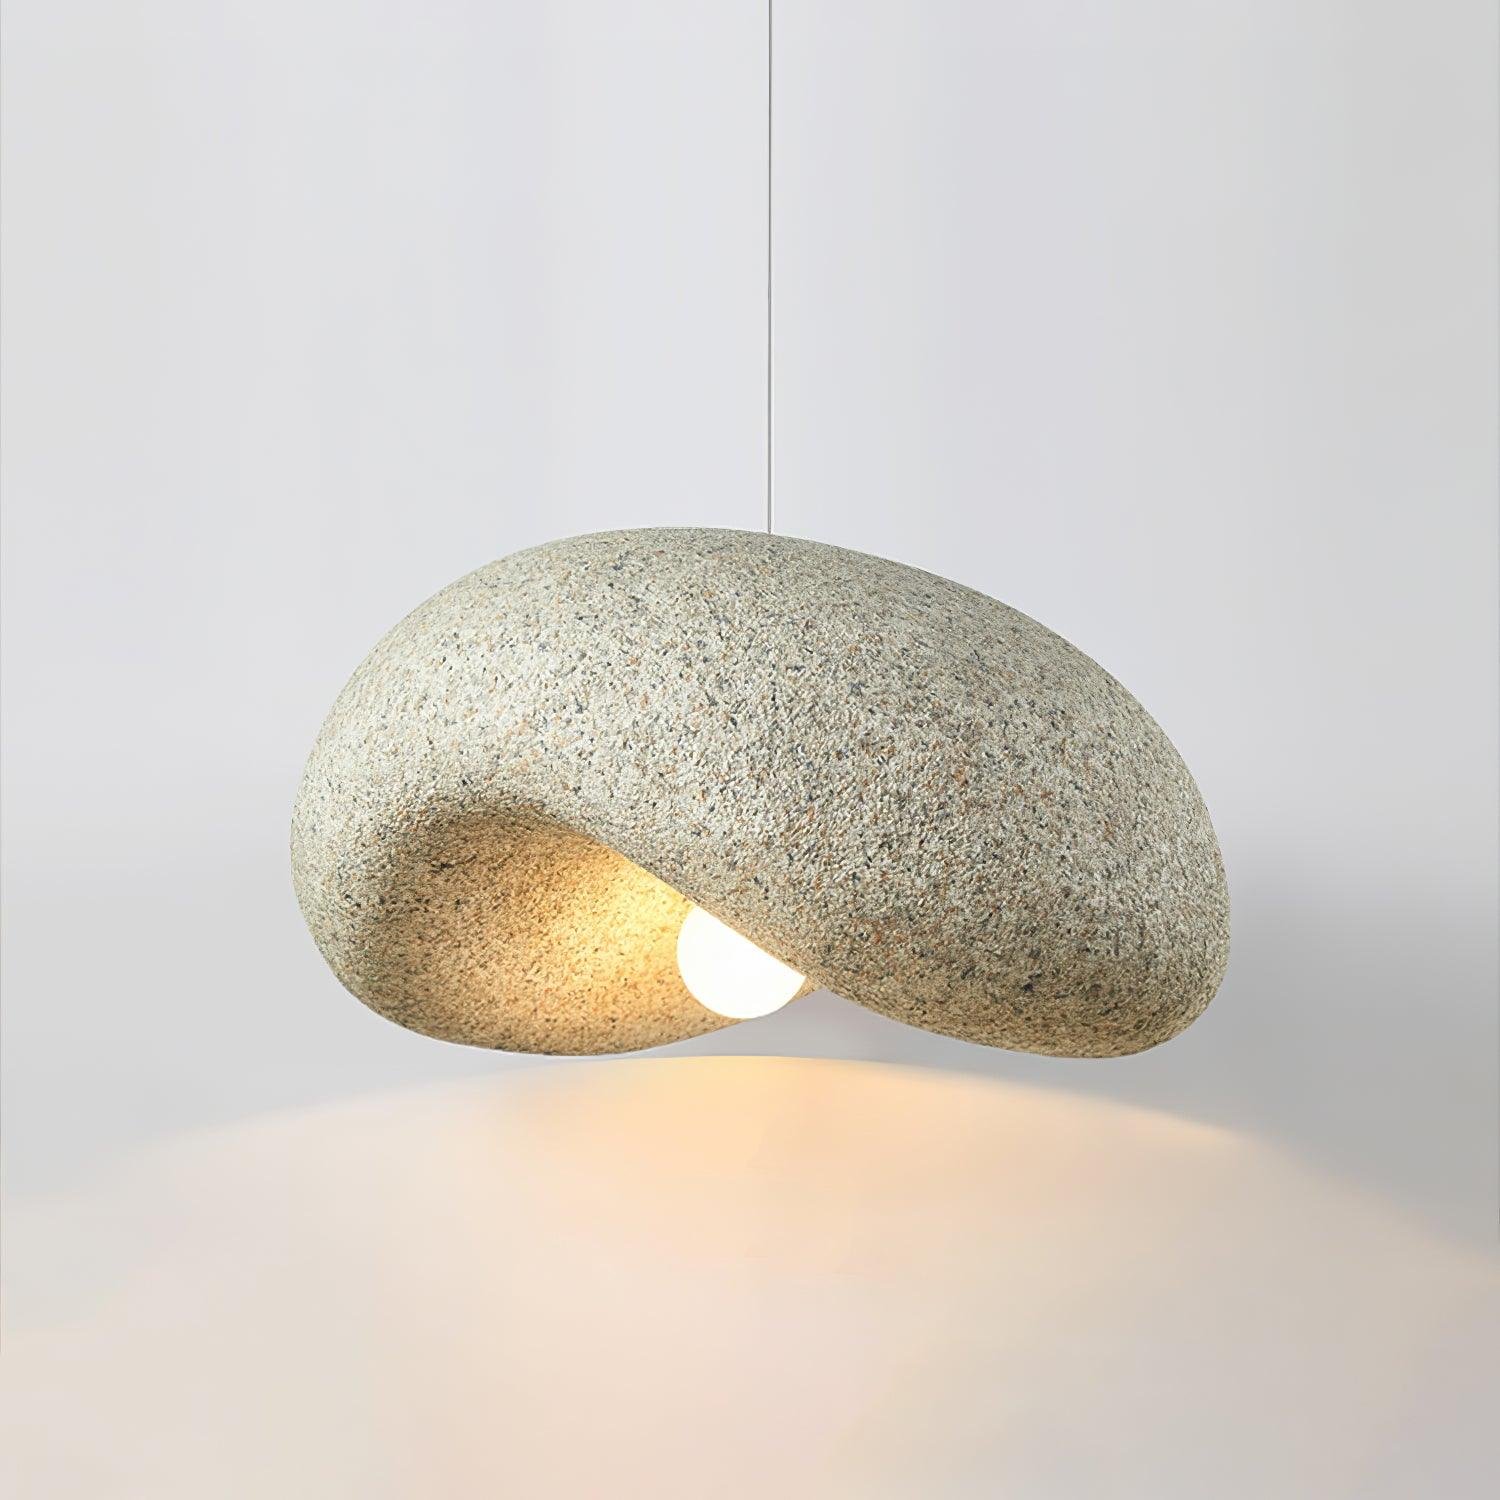 Speckled Pendant Lamp in Dunia Design, Diameter 15.7 inches x Height 6.7 inches (40cm x 17cm), Color: Light Yellow.